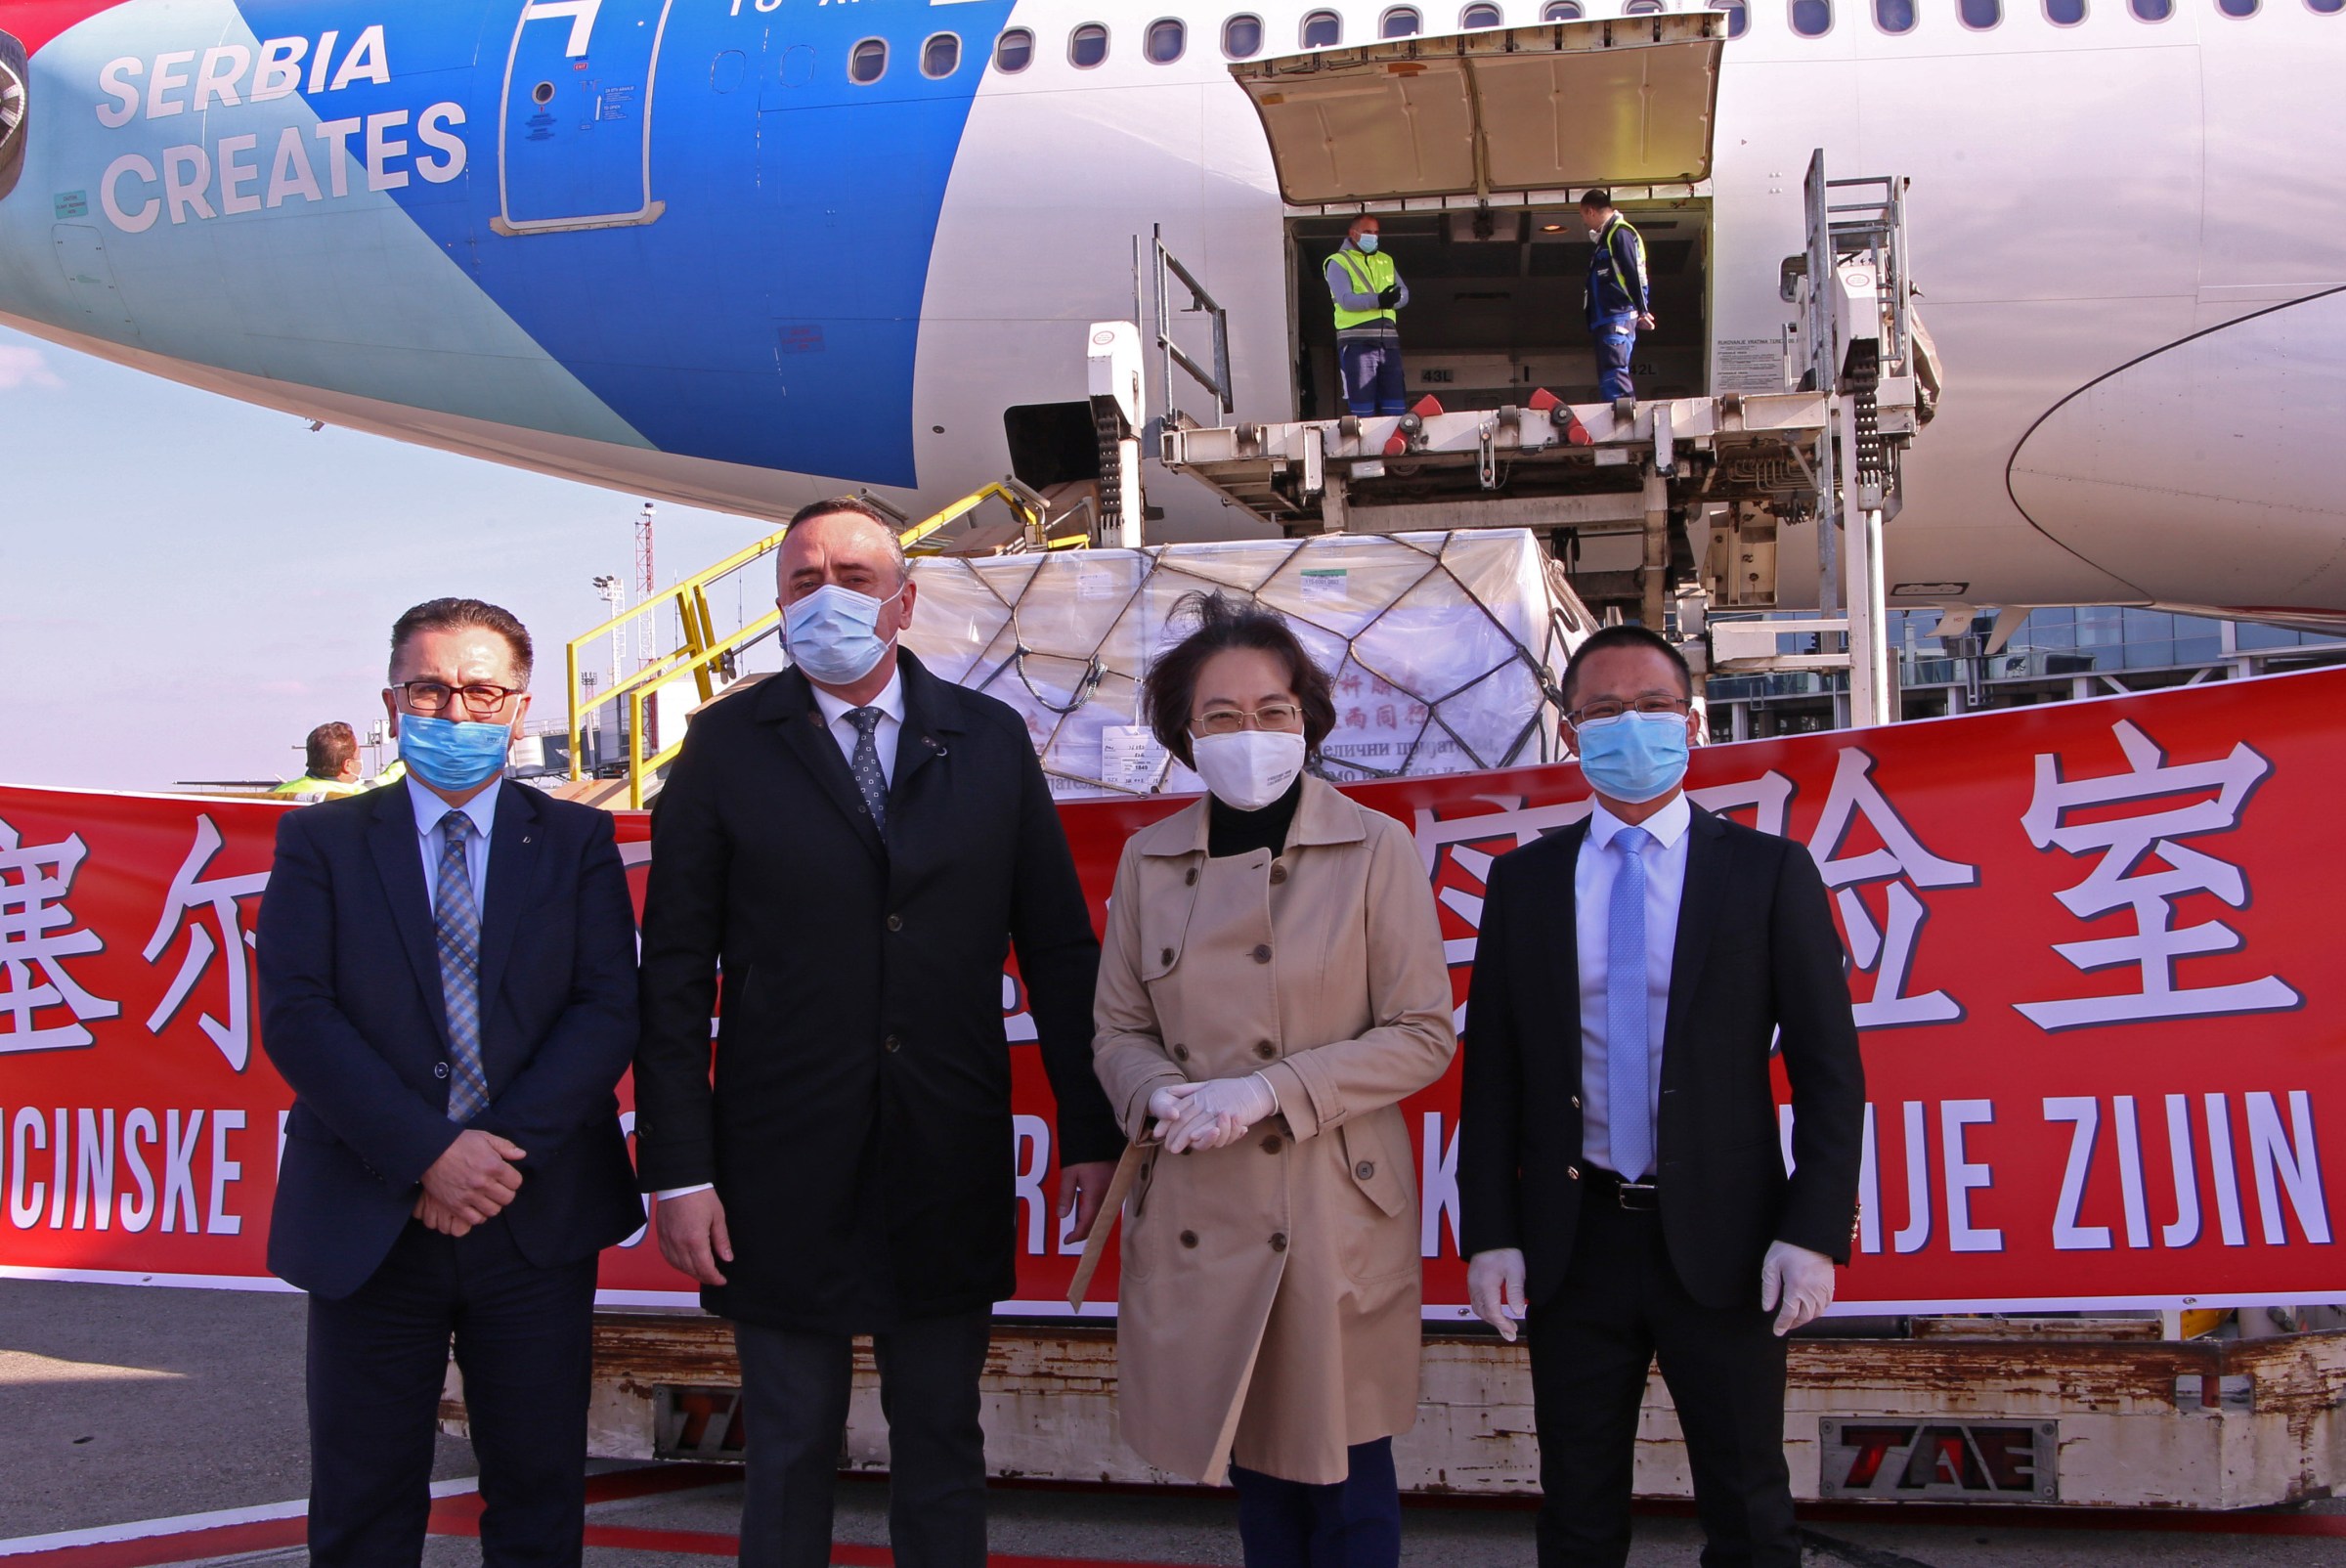 Serbian Minister of Mining and Energy Aleksandar Antić and Chinese Ambassador to Serbia Chen Bo pose for a photo in front of an airplane carrying equipment for new Serbian Covid-19 labs in Belgrade, Serbia, on April 15, 2020.